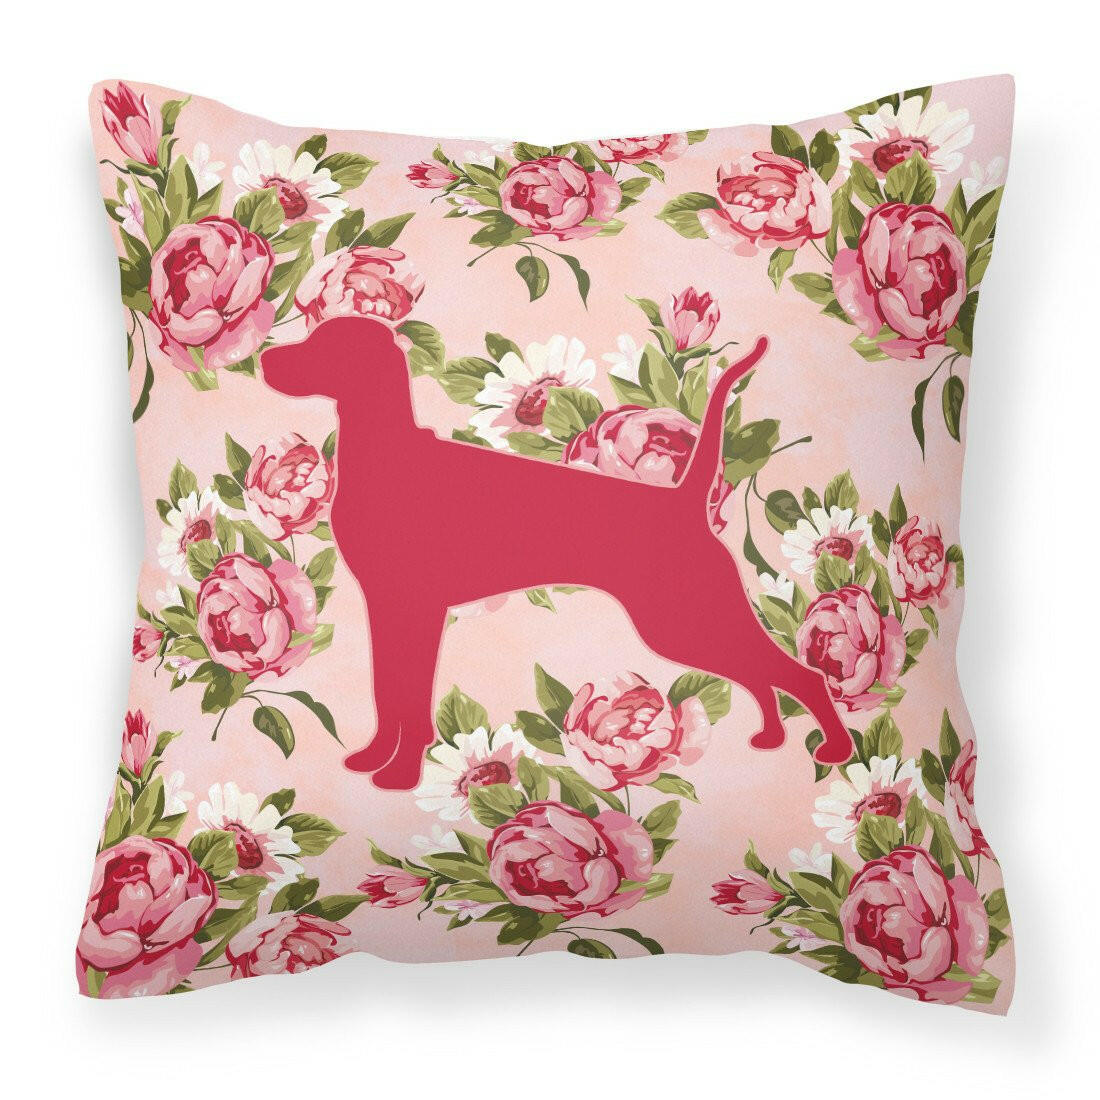 Pointer Shabby Chic Pink Roses  Fabric Decorative Pillow BB1105-RS-PK-PW1414 - the-store.com